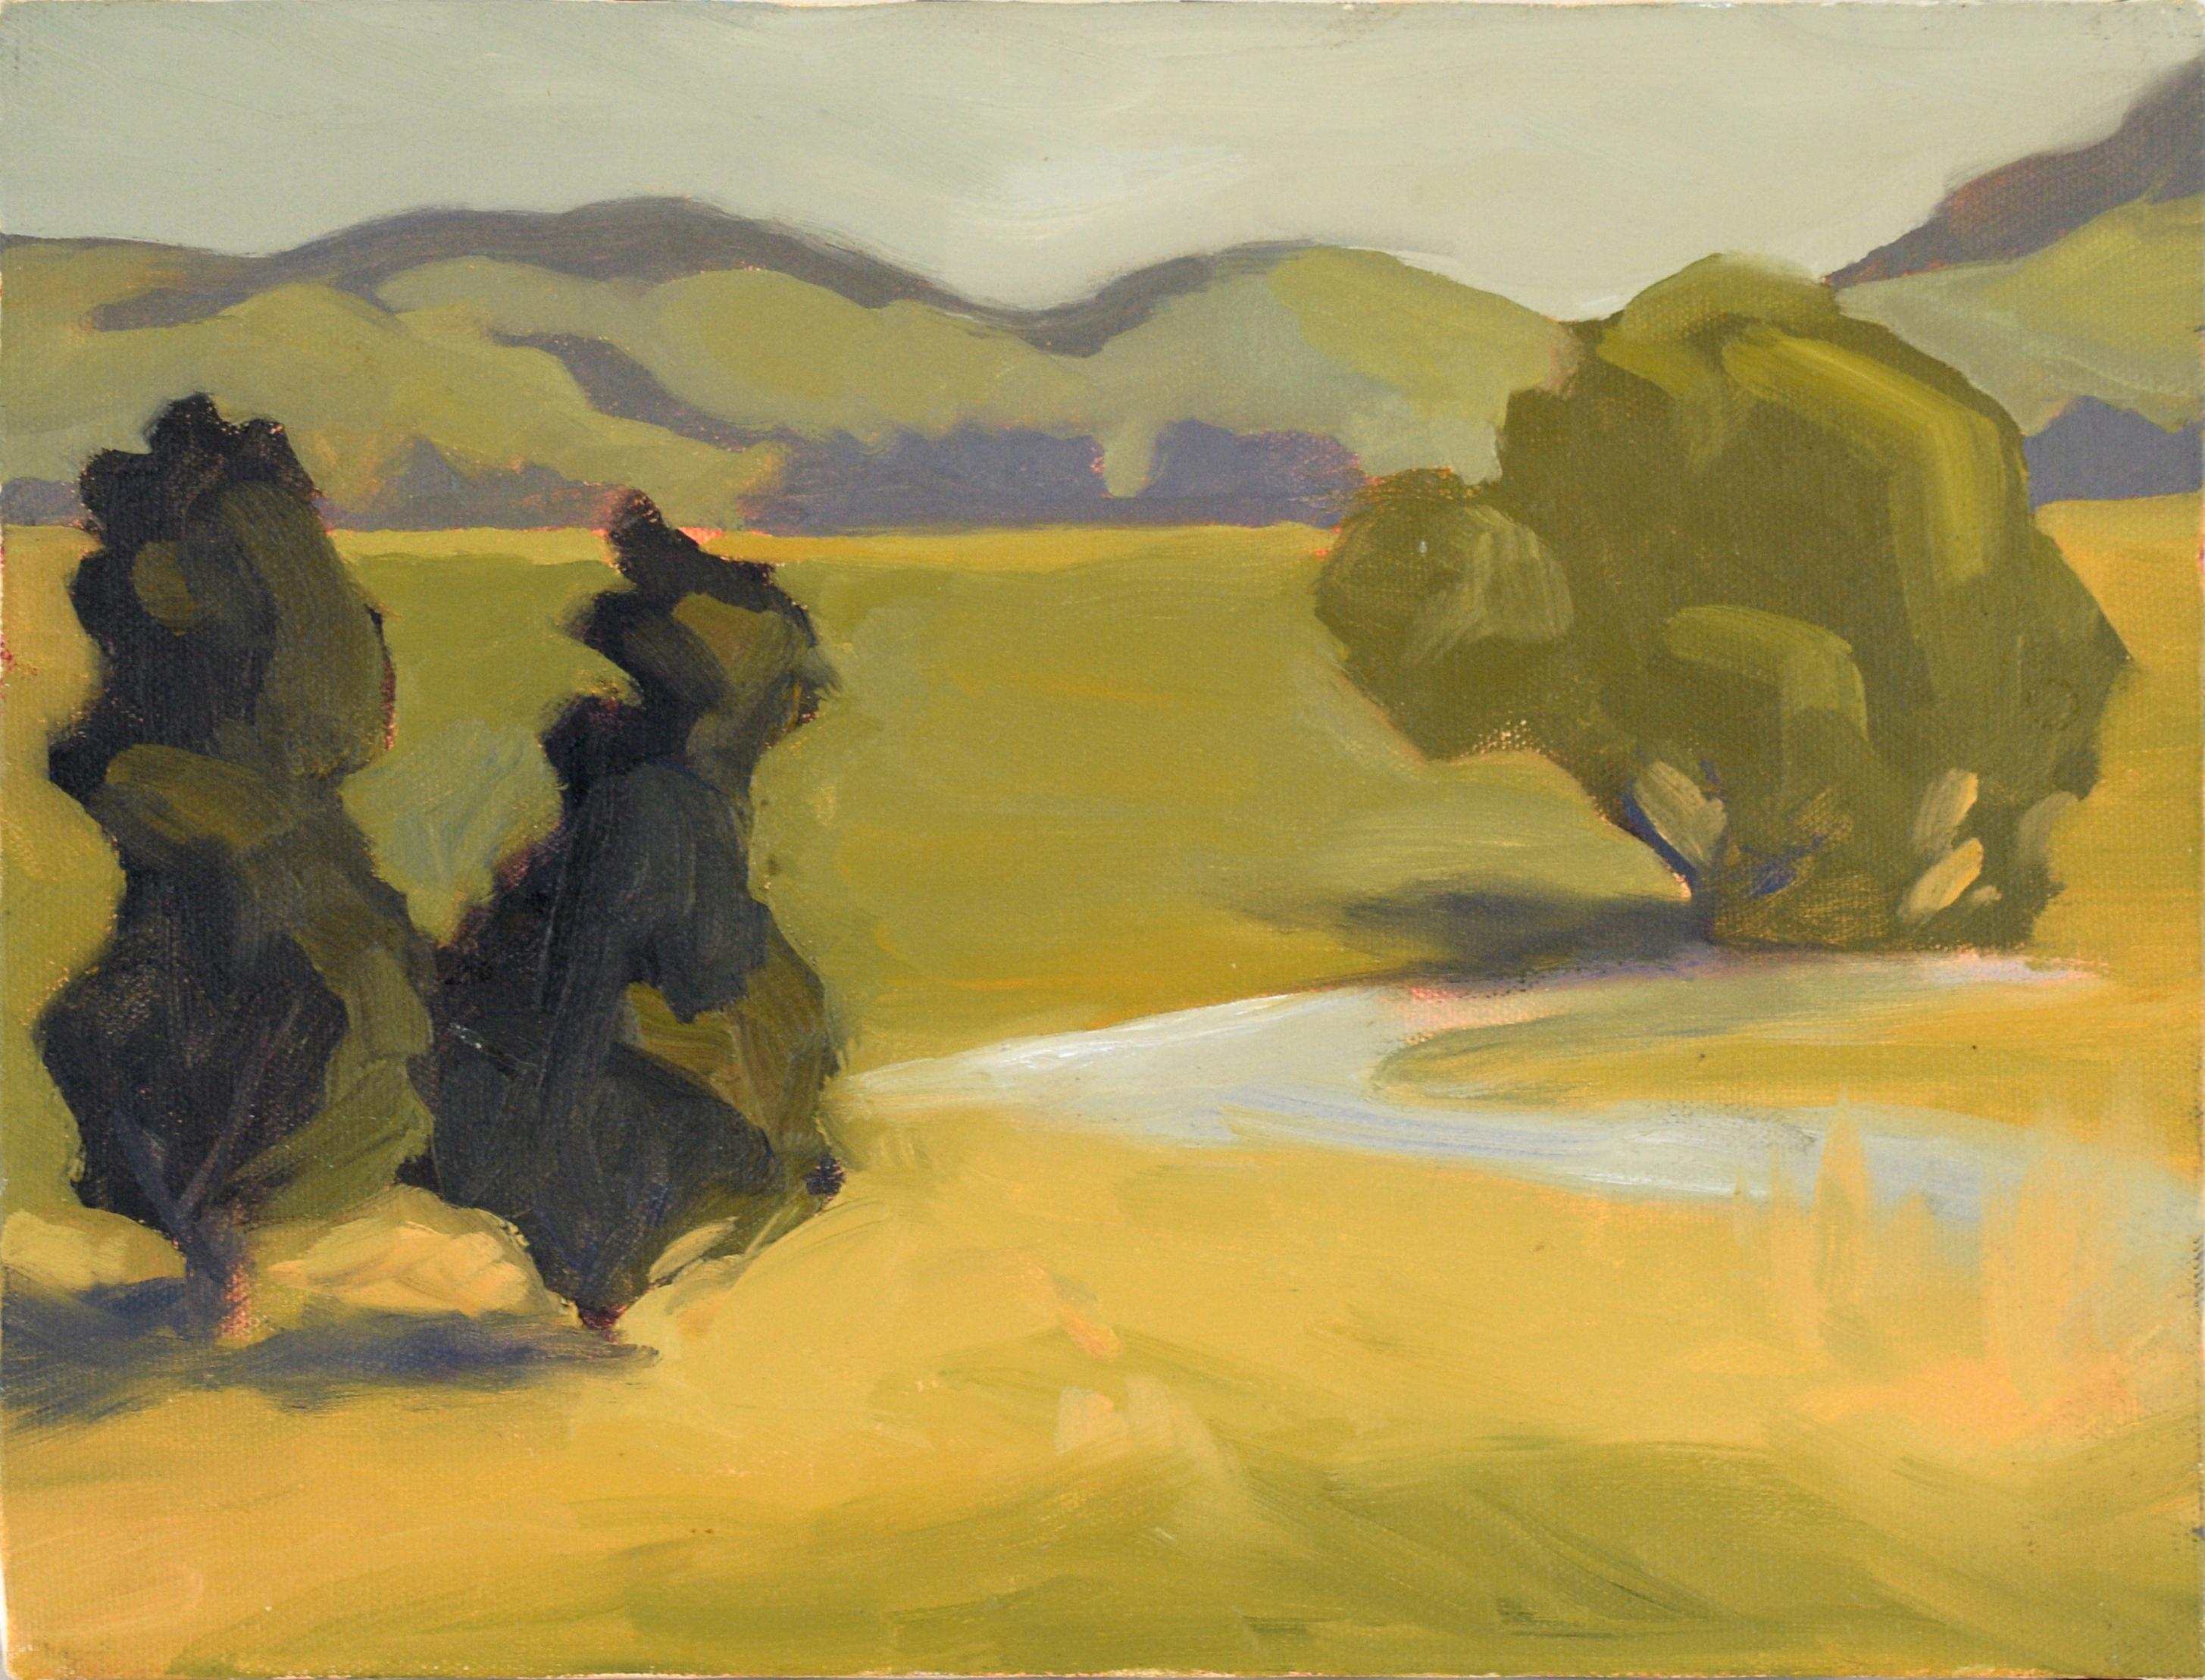 Olompali State Park, Marin County, CA - Plein Air Landscape in Oil on Canvas - Painting by Mary Howard